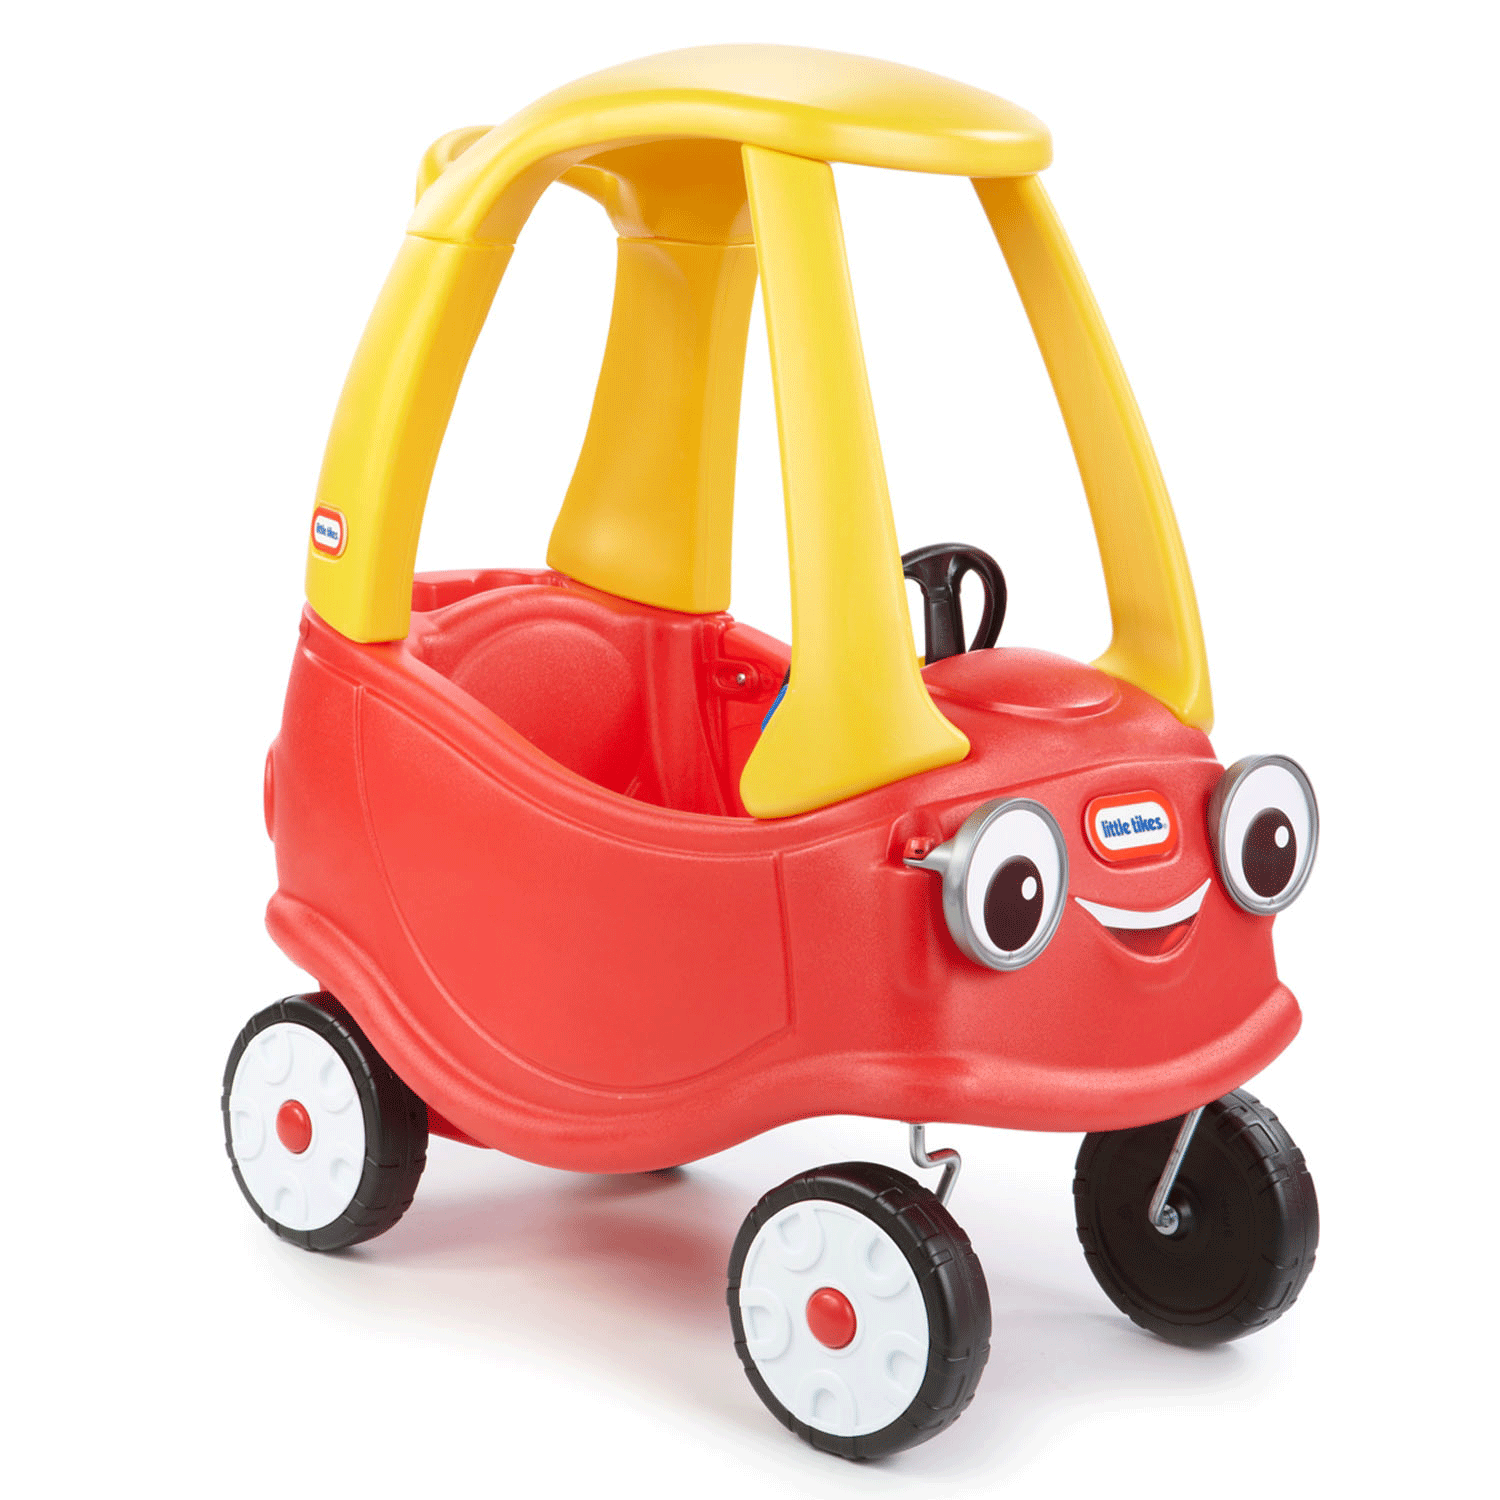 Little Tikes Cozy Coupe Toddler Outdoor Push Ride On Toy Car for ...